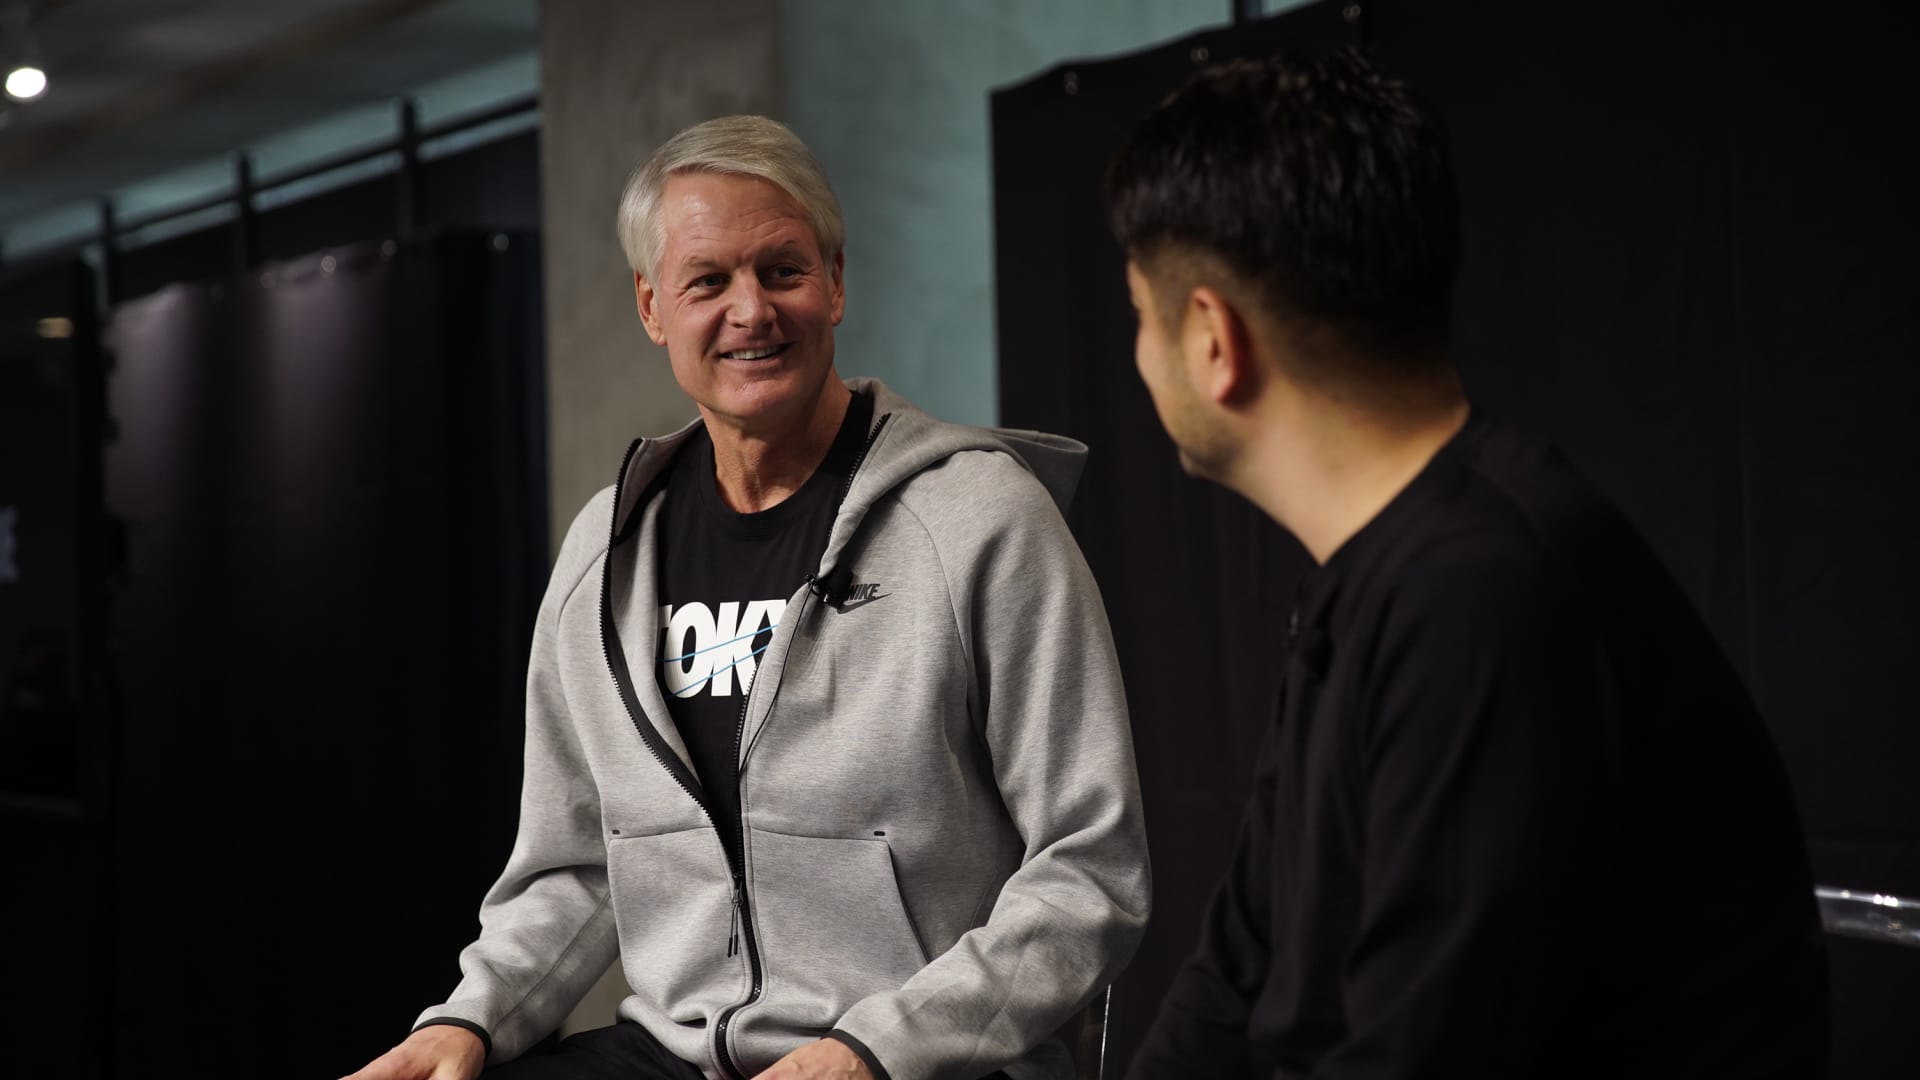 Nike CEO John Donahoe says brands need to stand by their values amid DeSantis, Disney feud